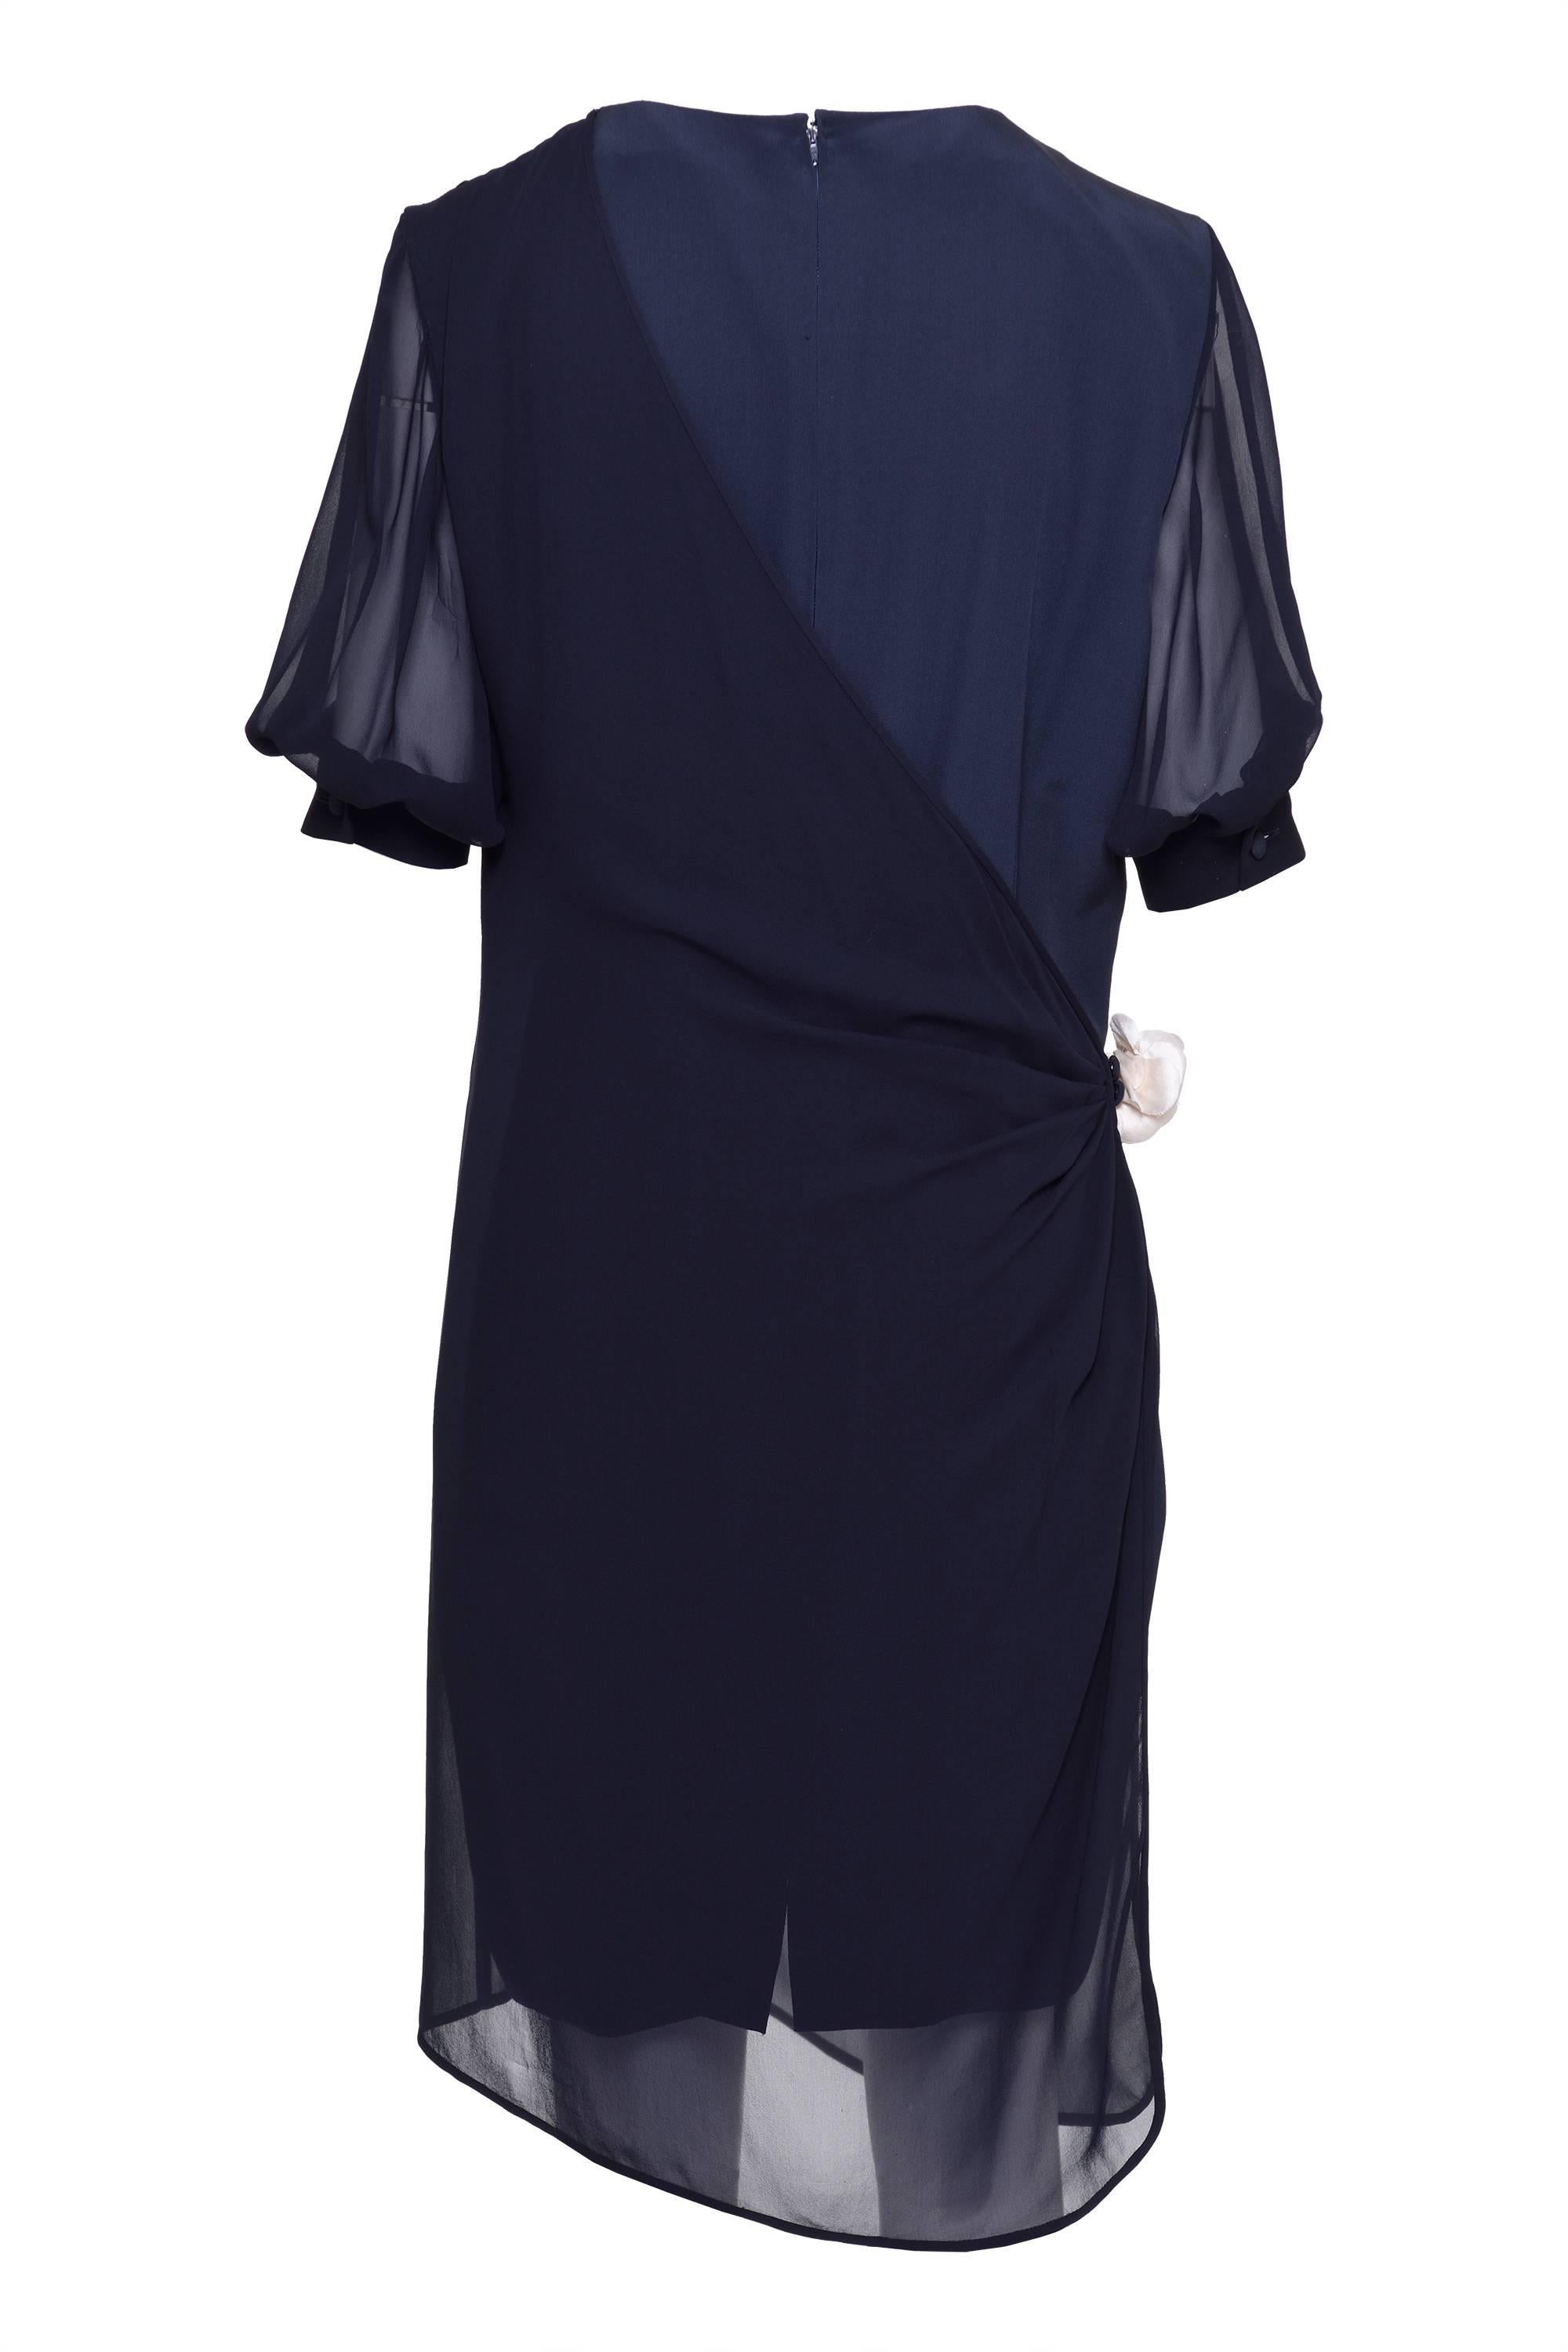 This lovely Mila Shön dress is in navy blue silk and organdy fabric. It has draped panel and back zip closure and is fully lined.

Excellent vintage condition

Label: Mila Shön - Made in Italy
Fabric: silk
Color: navy blue

Measurement:
Estimeted